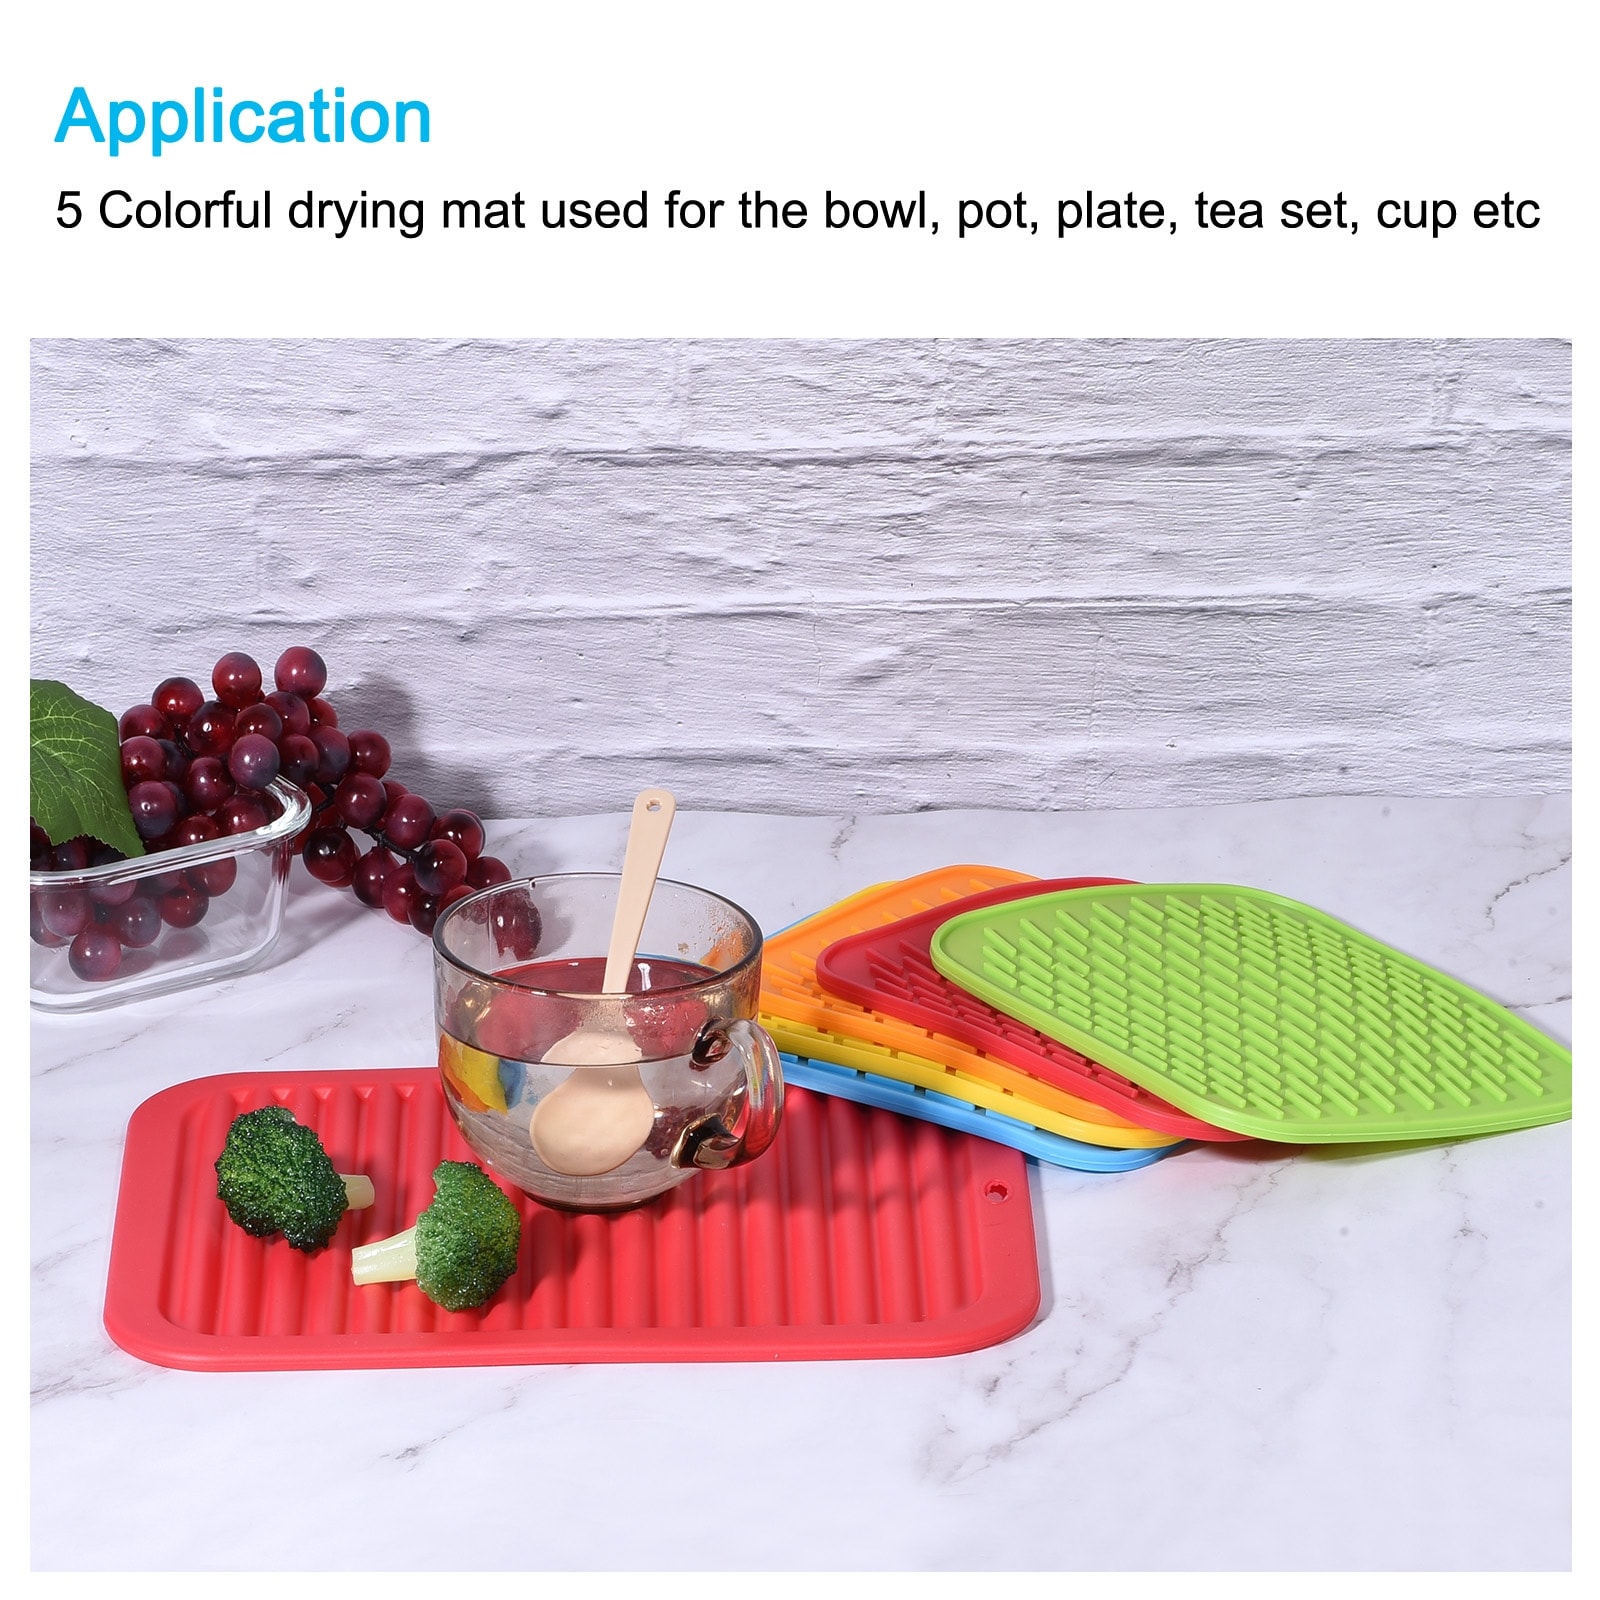 https://ak1.ostkcdn.com/images/products/is/images/direct/1d837291abdf23782ffff0bb70aee9bac25730e4/Silicone-Dish-Drying-Mat%2C-Under-Sink-Drain-Pad-for-Kitchen-Counter.jpg